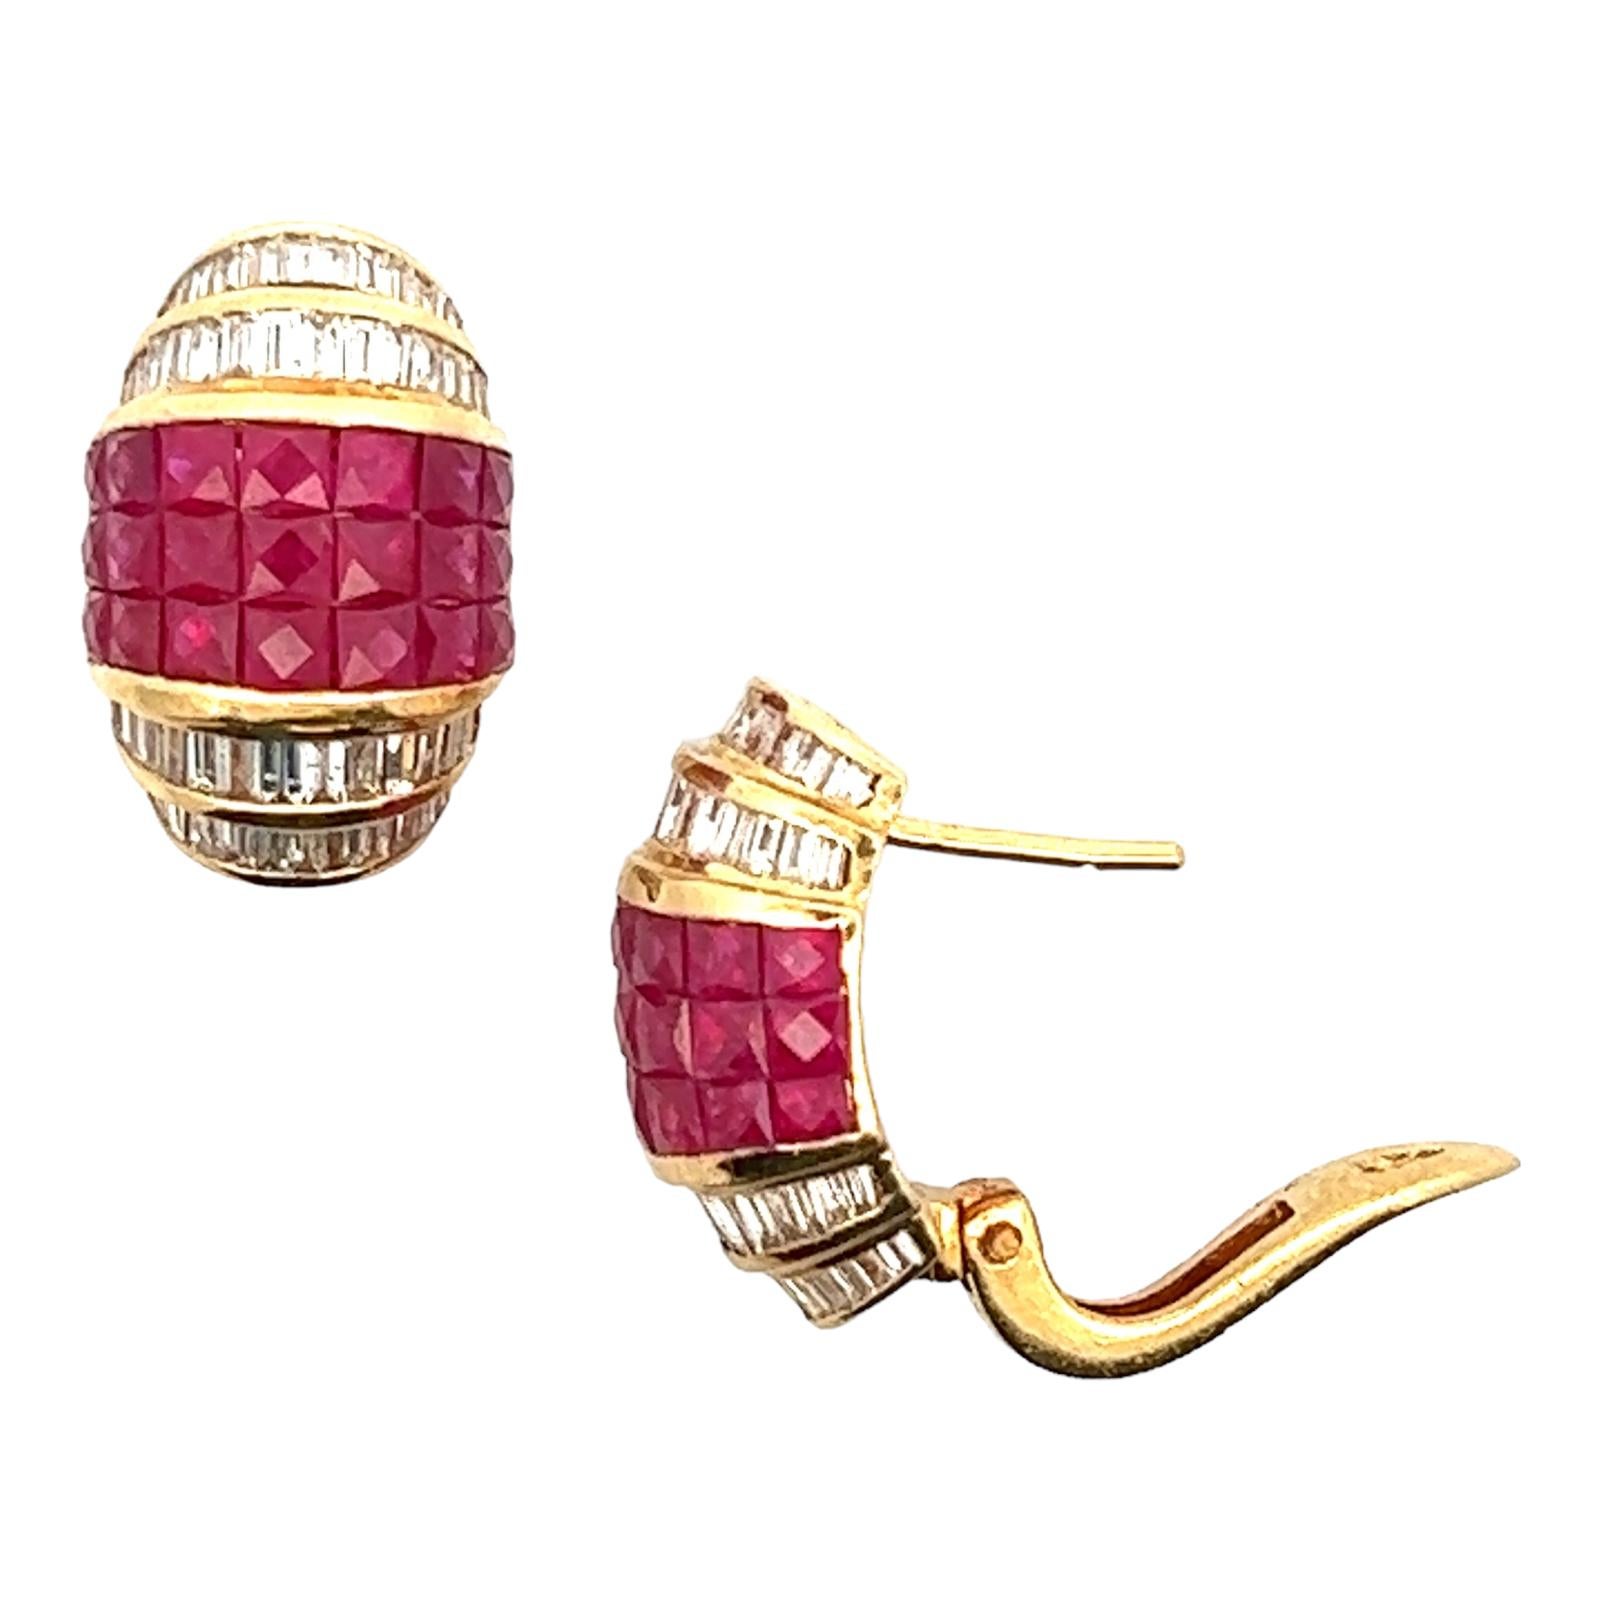 Diamond and ruby earrings fashioned in 18 karat yellow gold. The earrings feature 108 baguette cut diamonds weighing approximately 2.00 CTW and 42 French cut ruby gemstones weighing approximately 6.00 CTW. The diamonds are graded H-I color and SI1